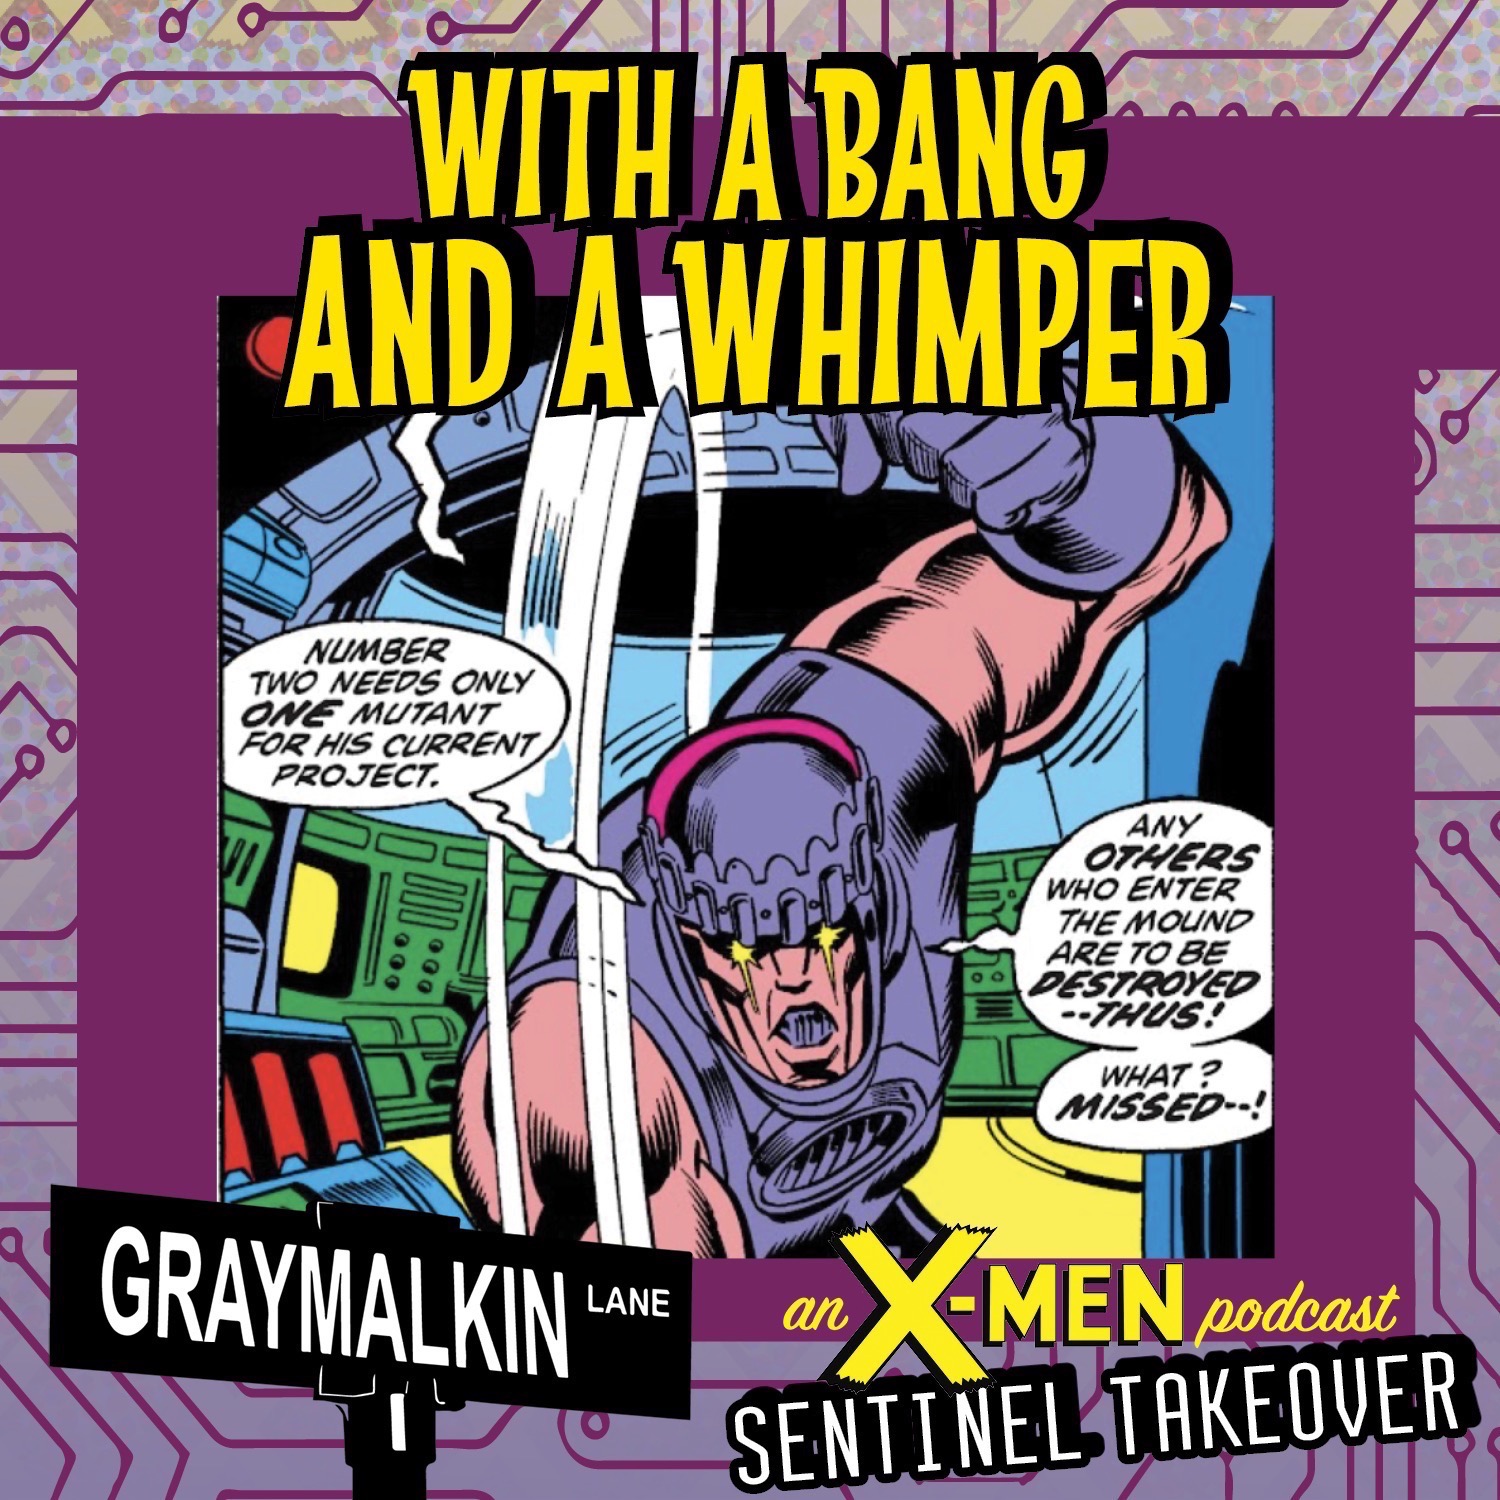 Avengers 104: With a Bang and a Whimper! Featuring John Layman! Steve Ekstrom! Michael Elliott! Then an interview with Linda Fite and Annie Nocenti!